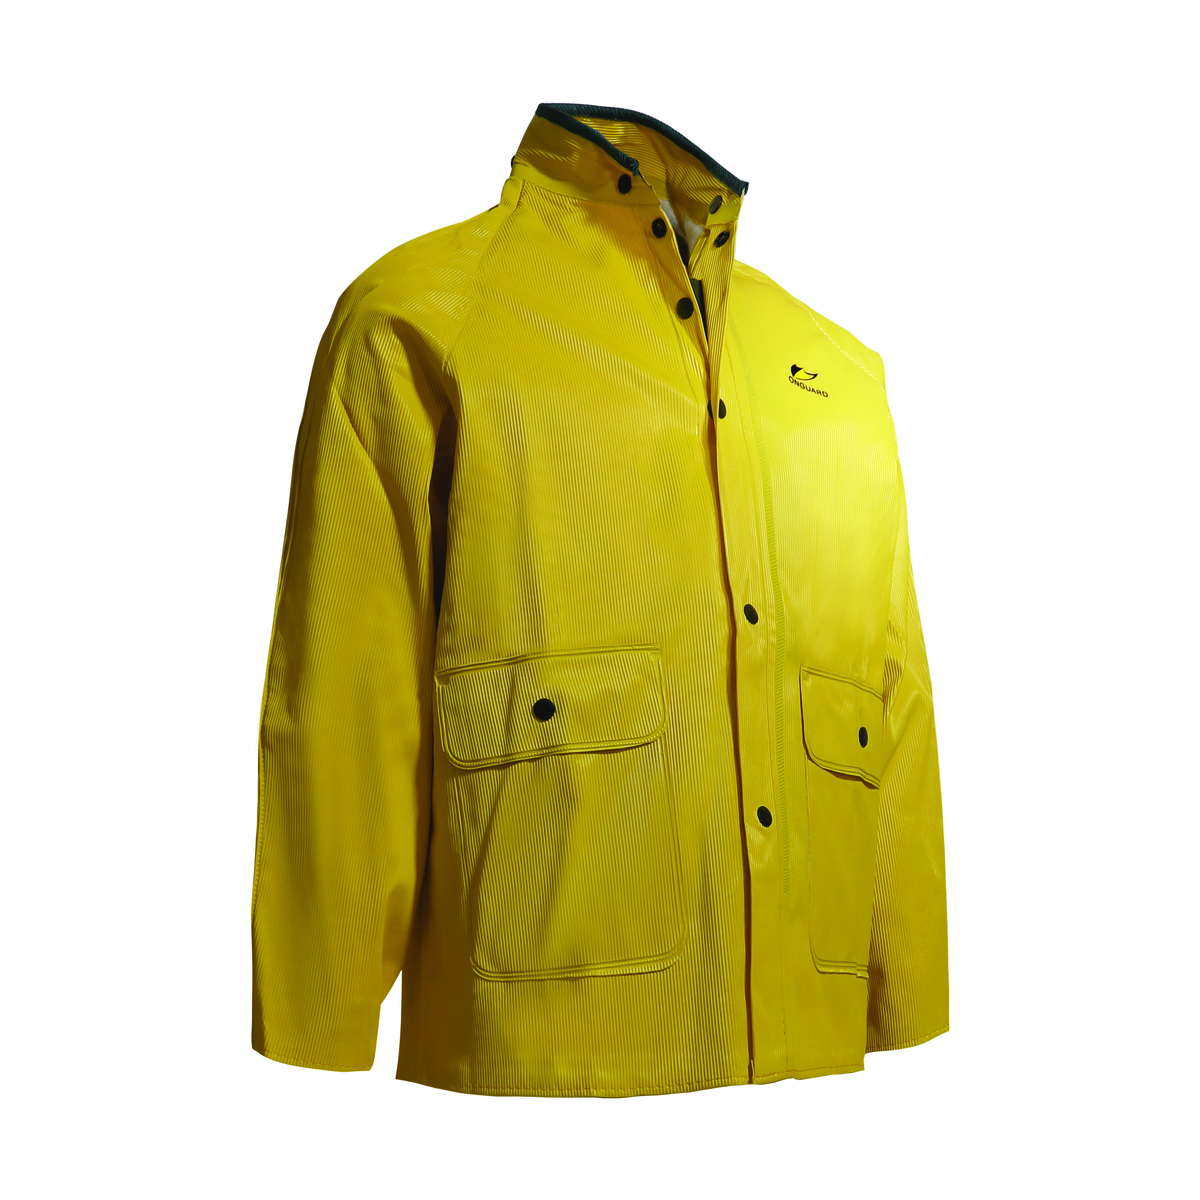 Dunlop® Protective Footwear X-Large Yellow Webtex .65 mm Polyester/PVC Rain Jacket With Hood Snaps